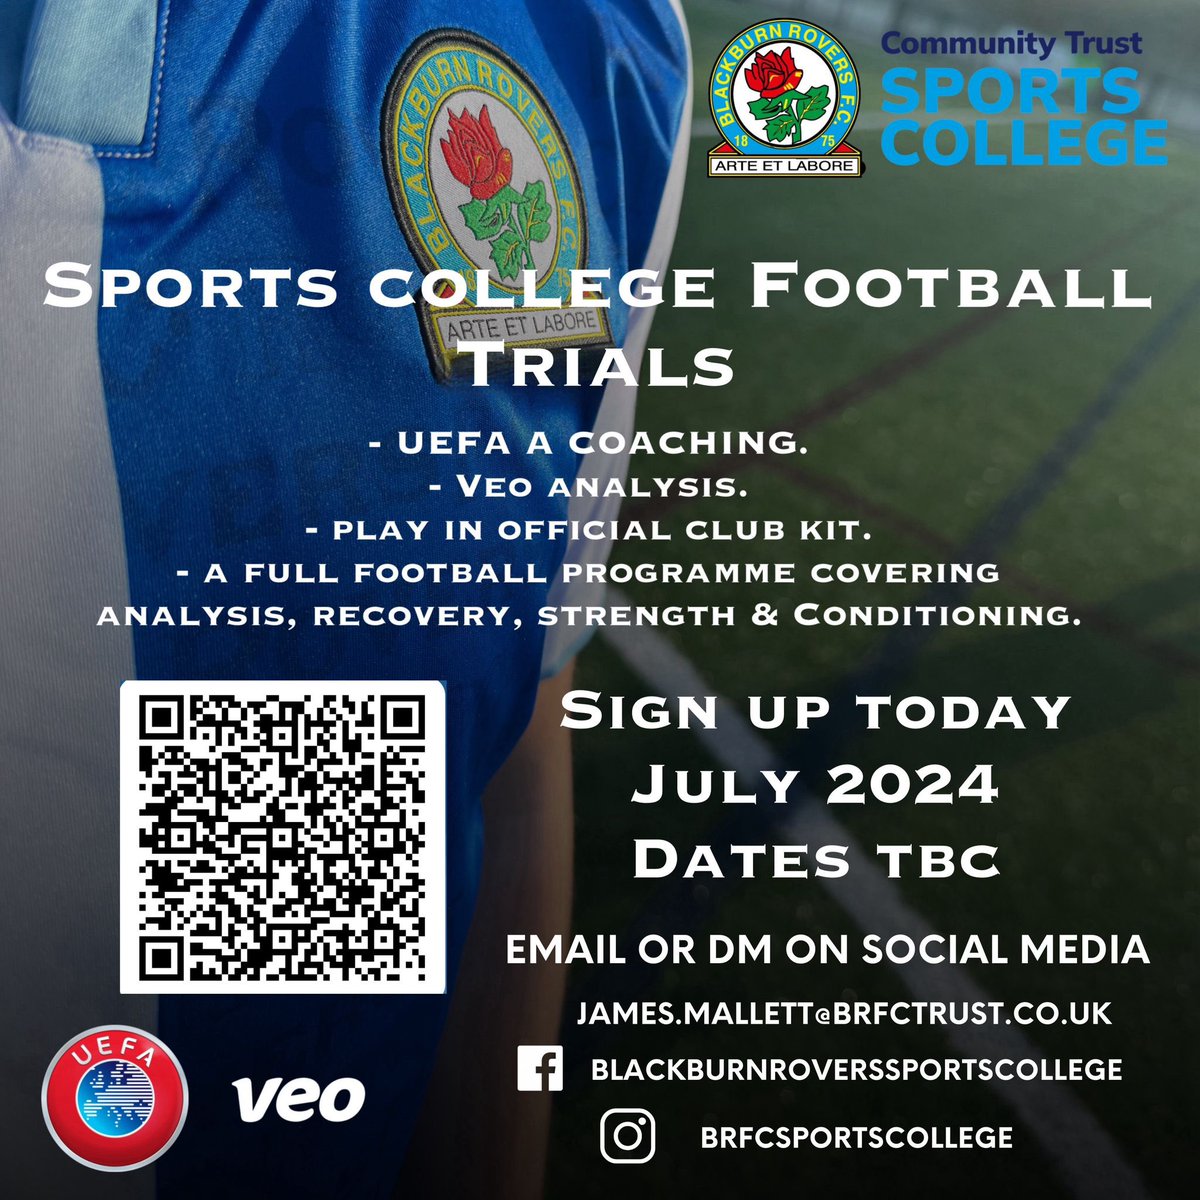 🌟 Dreaming of a future on the pitch? 🚀 Don't miss your shot! ⚽️Join us at Blackburn #Rovers Sports College for an unmatched football journey this September! ✨ 🔍Experience elite UEFA A coaching sessions, cutting-edge Veo analysis, and a comprehensive training program